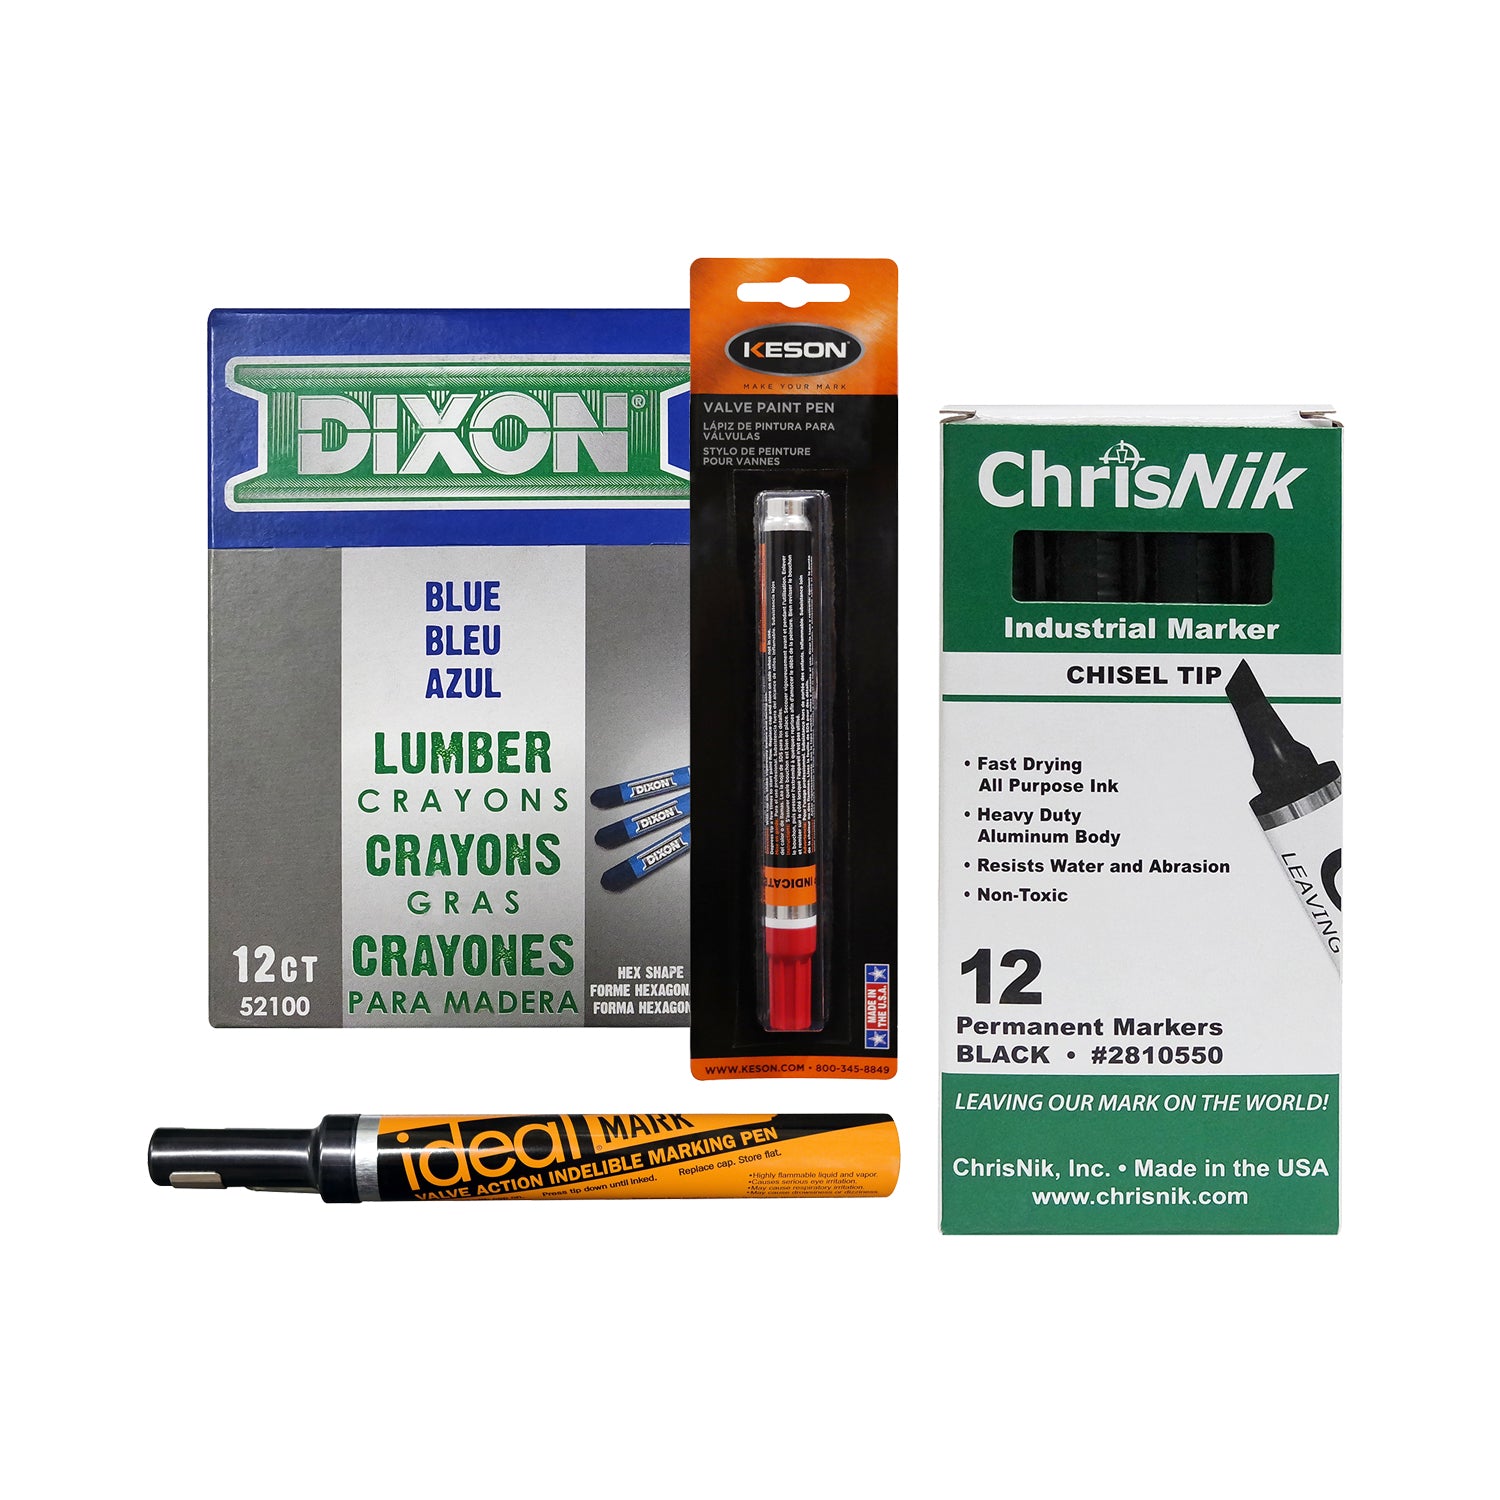 field marking supplies, markers, crayons